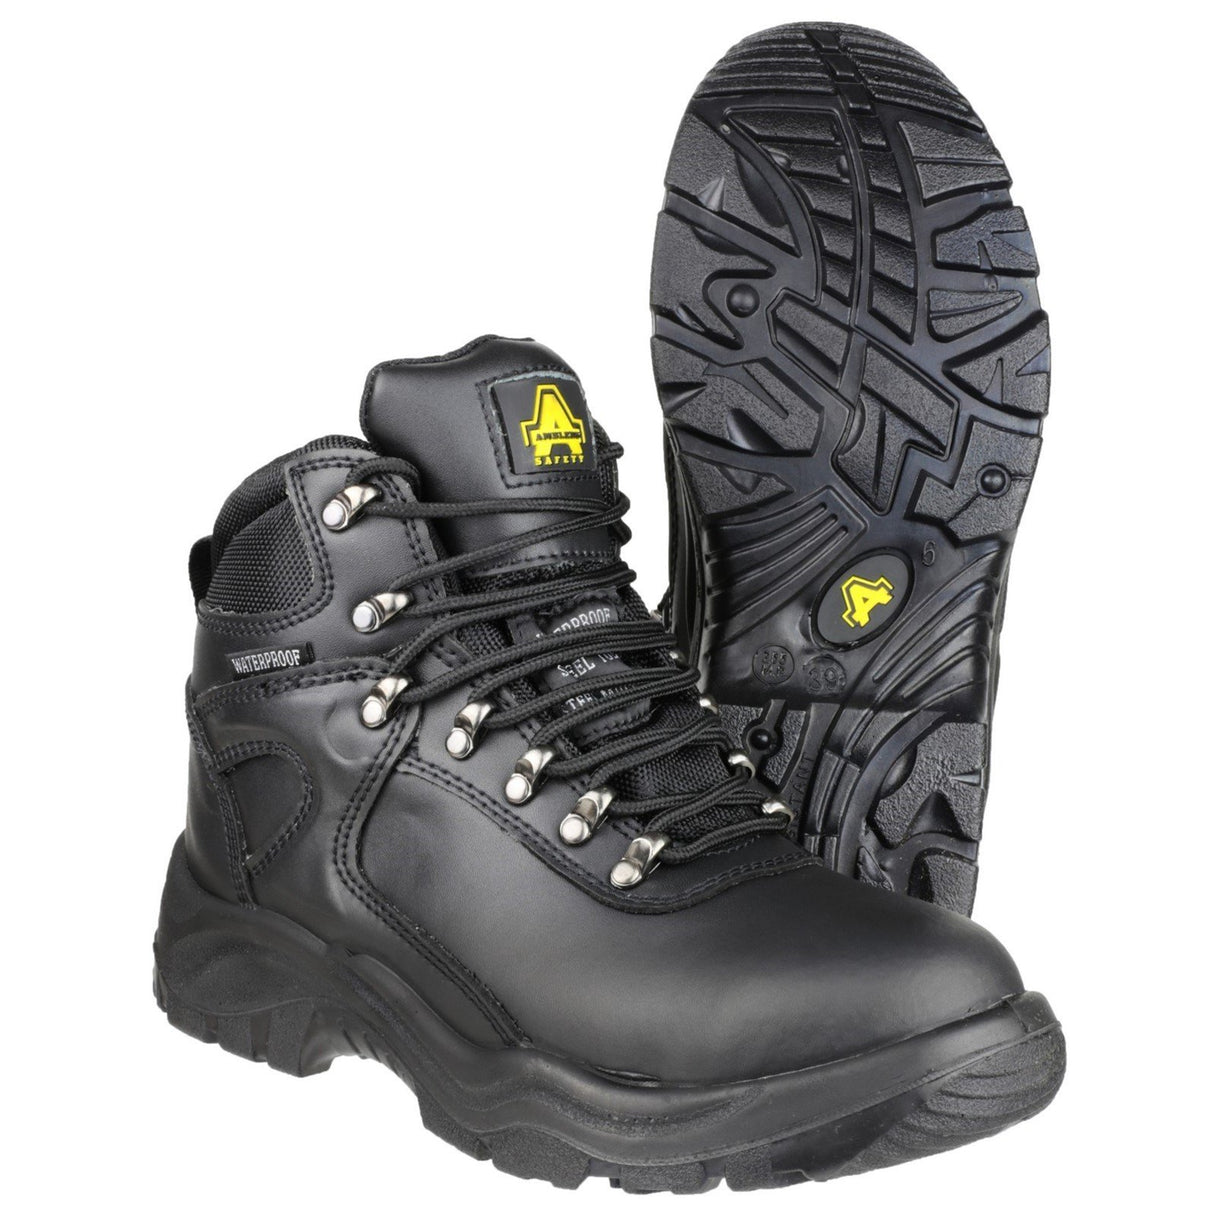 Amblers Safety Low-Cut Waterproof Lace Up Safety Boots